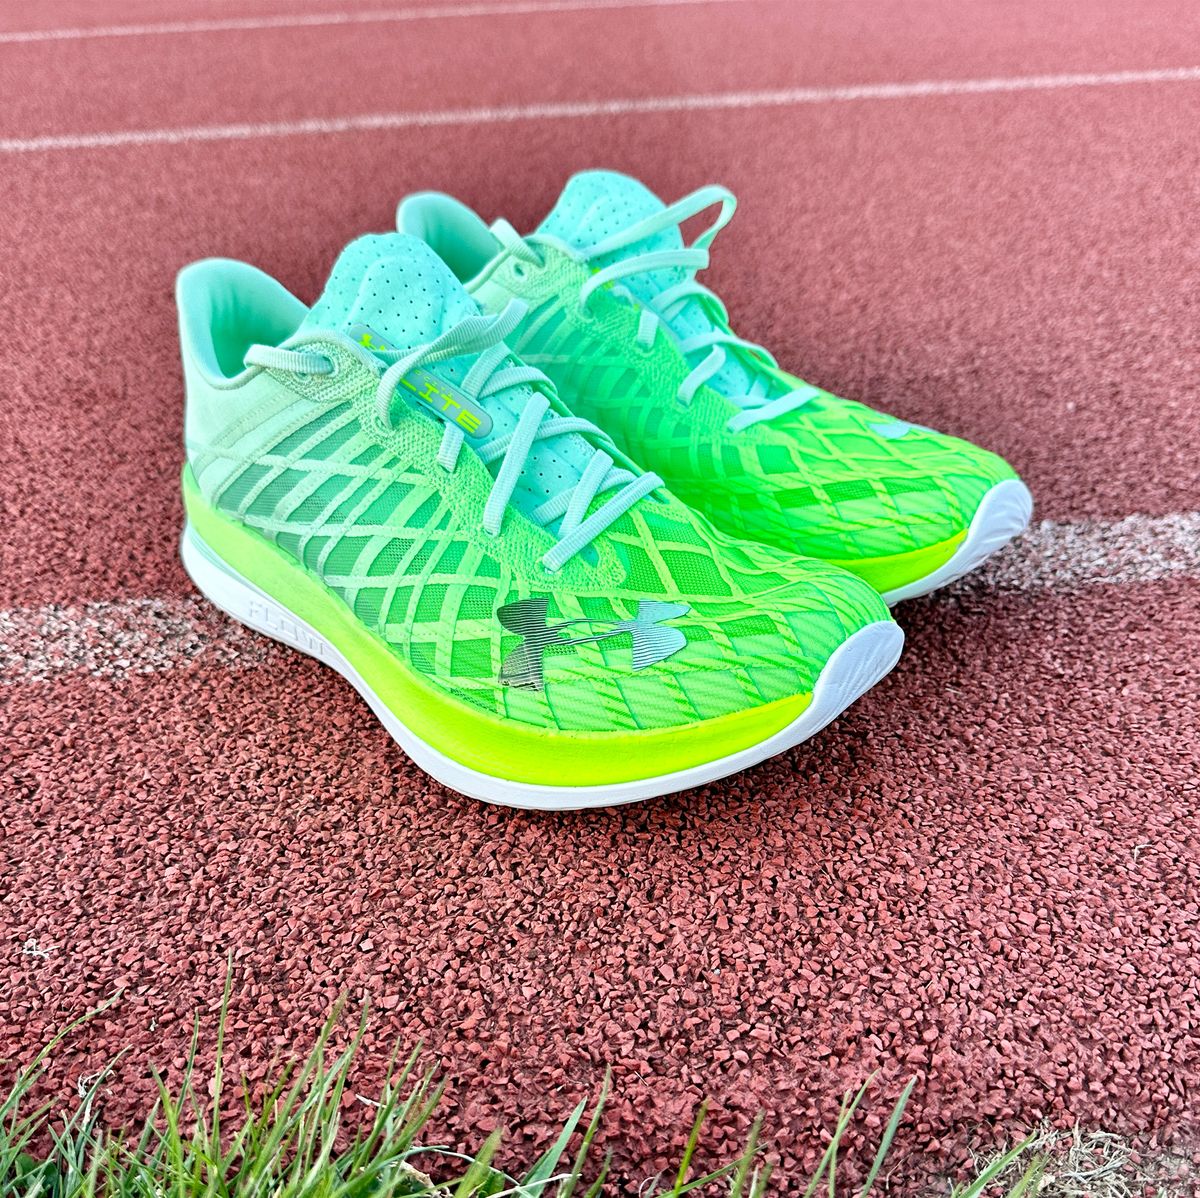 Under Armour Flow Velociti Elite Review: A Carbon-Plated Beast